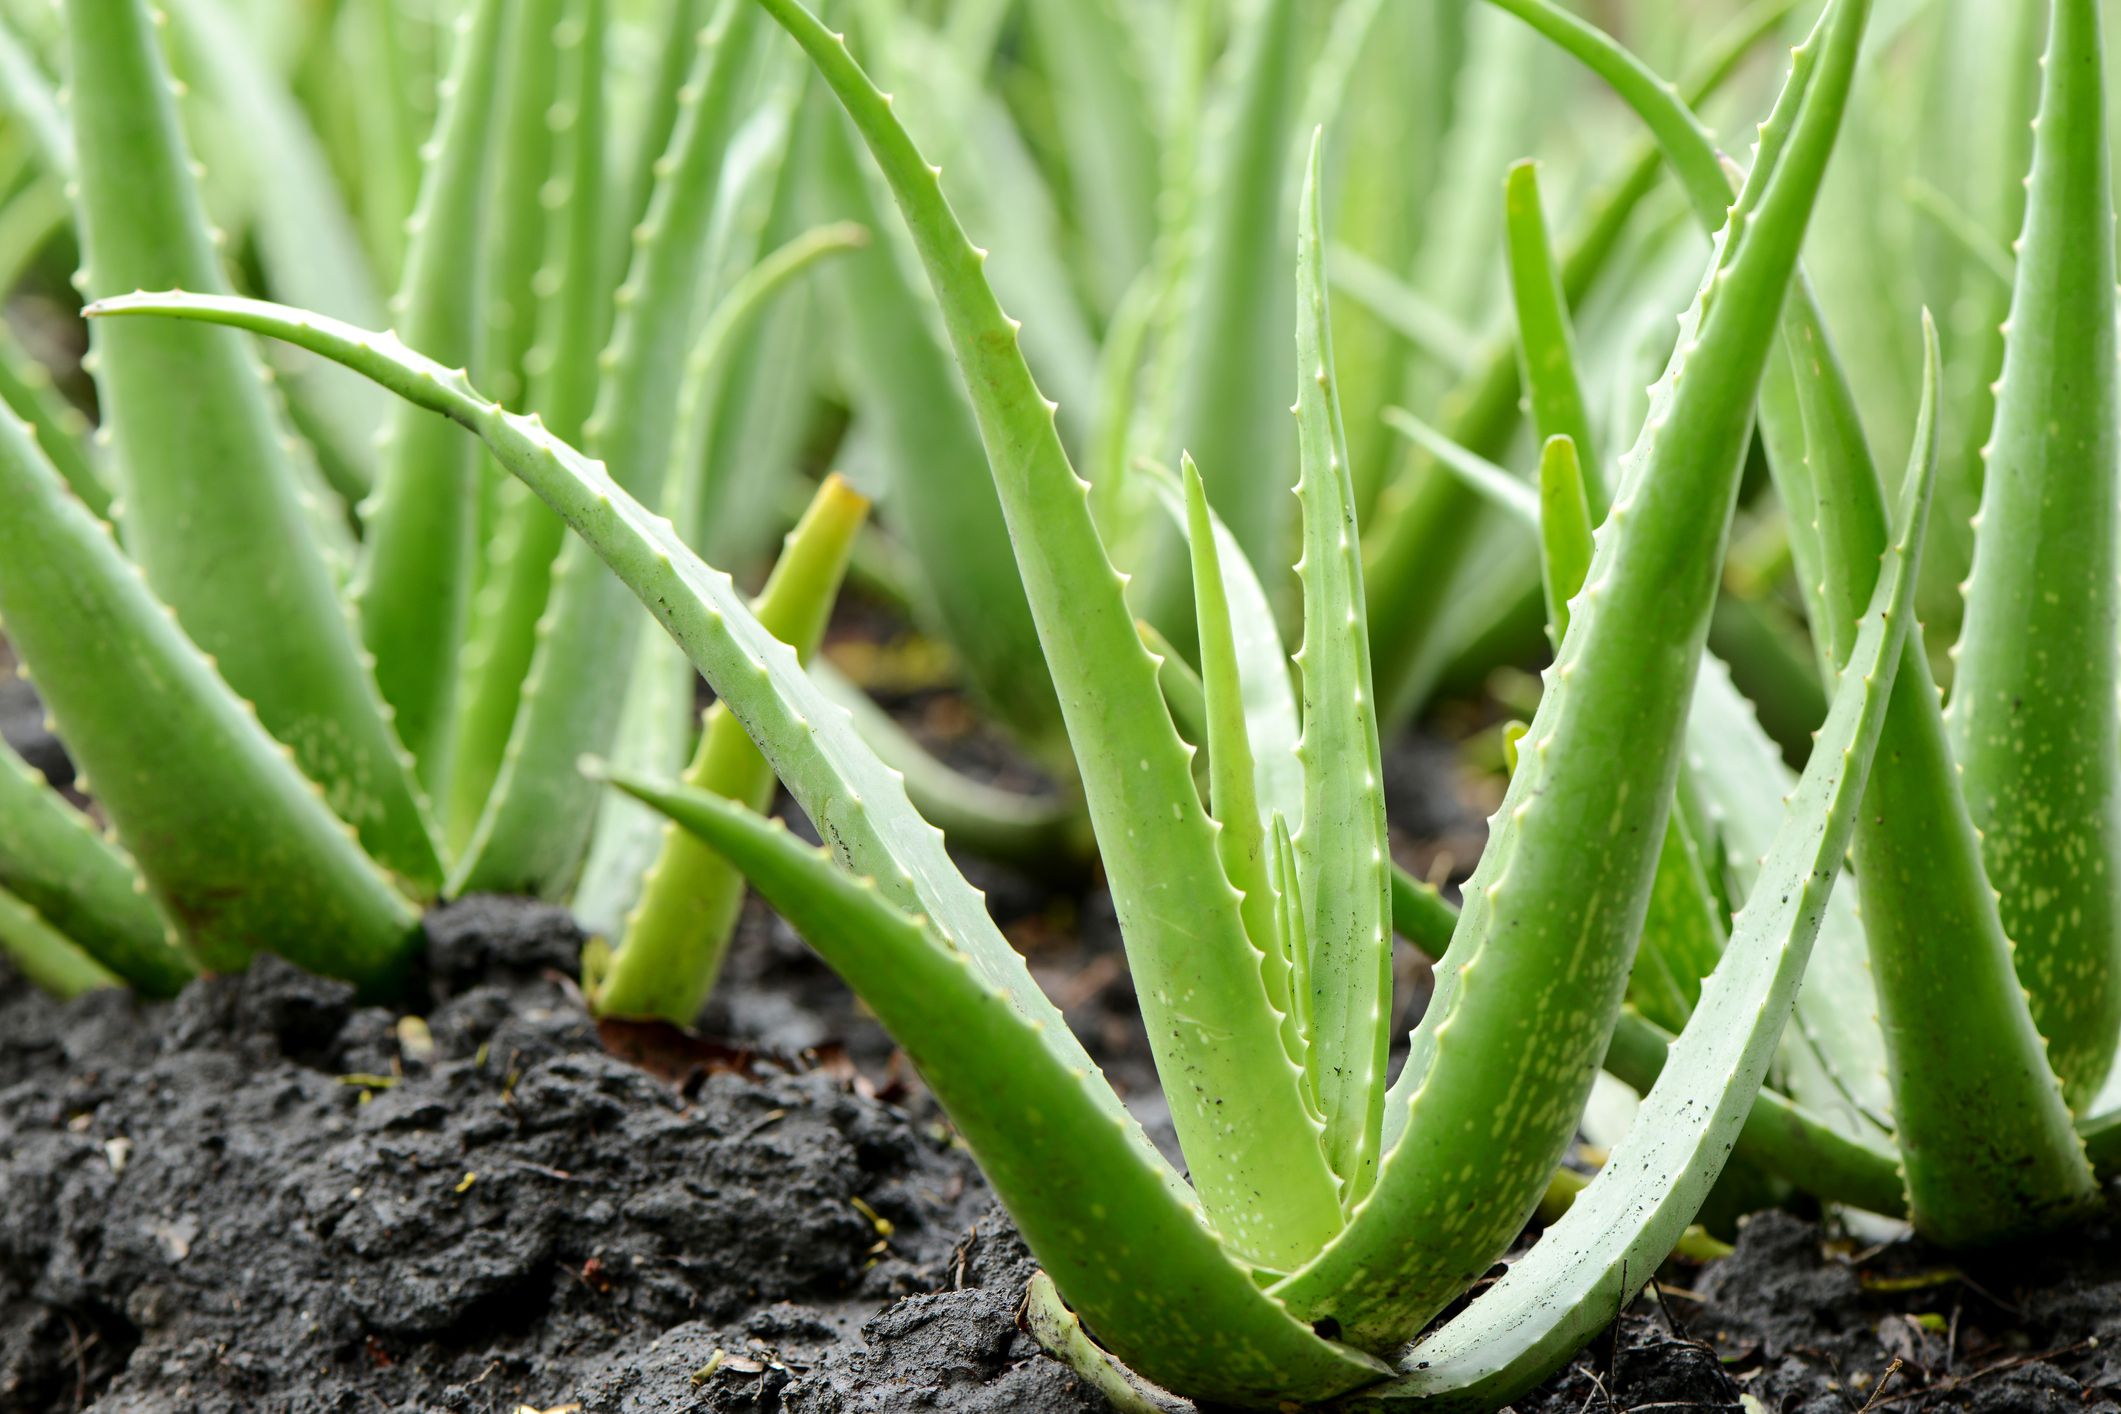 <p>Known for healing properties that help soothe burns and reduce inflammation, aloe is also great for promoting healthy skin and hair in humans. The plant does not have the same benefits for pets: The saponins in aloe vera can cause cause vomiting, diarrhea, lethargy, and tremors in dogs and cats. </p><p><b>Related:</b> <a href="https://blog.cheapism.com/dogs-vs-cats-which-makes-best-pet-2828/">Dogs vs. Cats — Which Makes the Best Pet?</a></p>